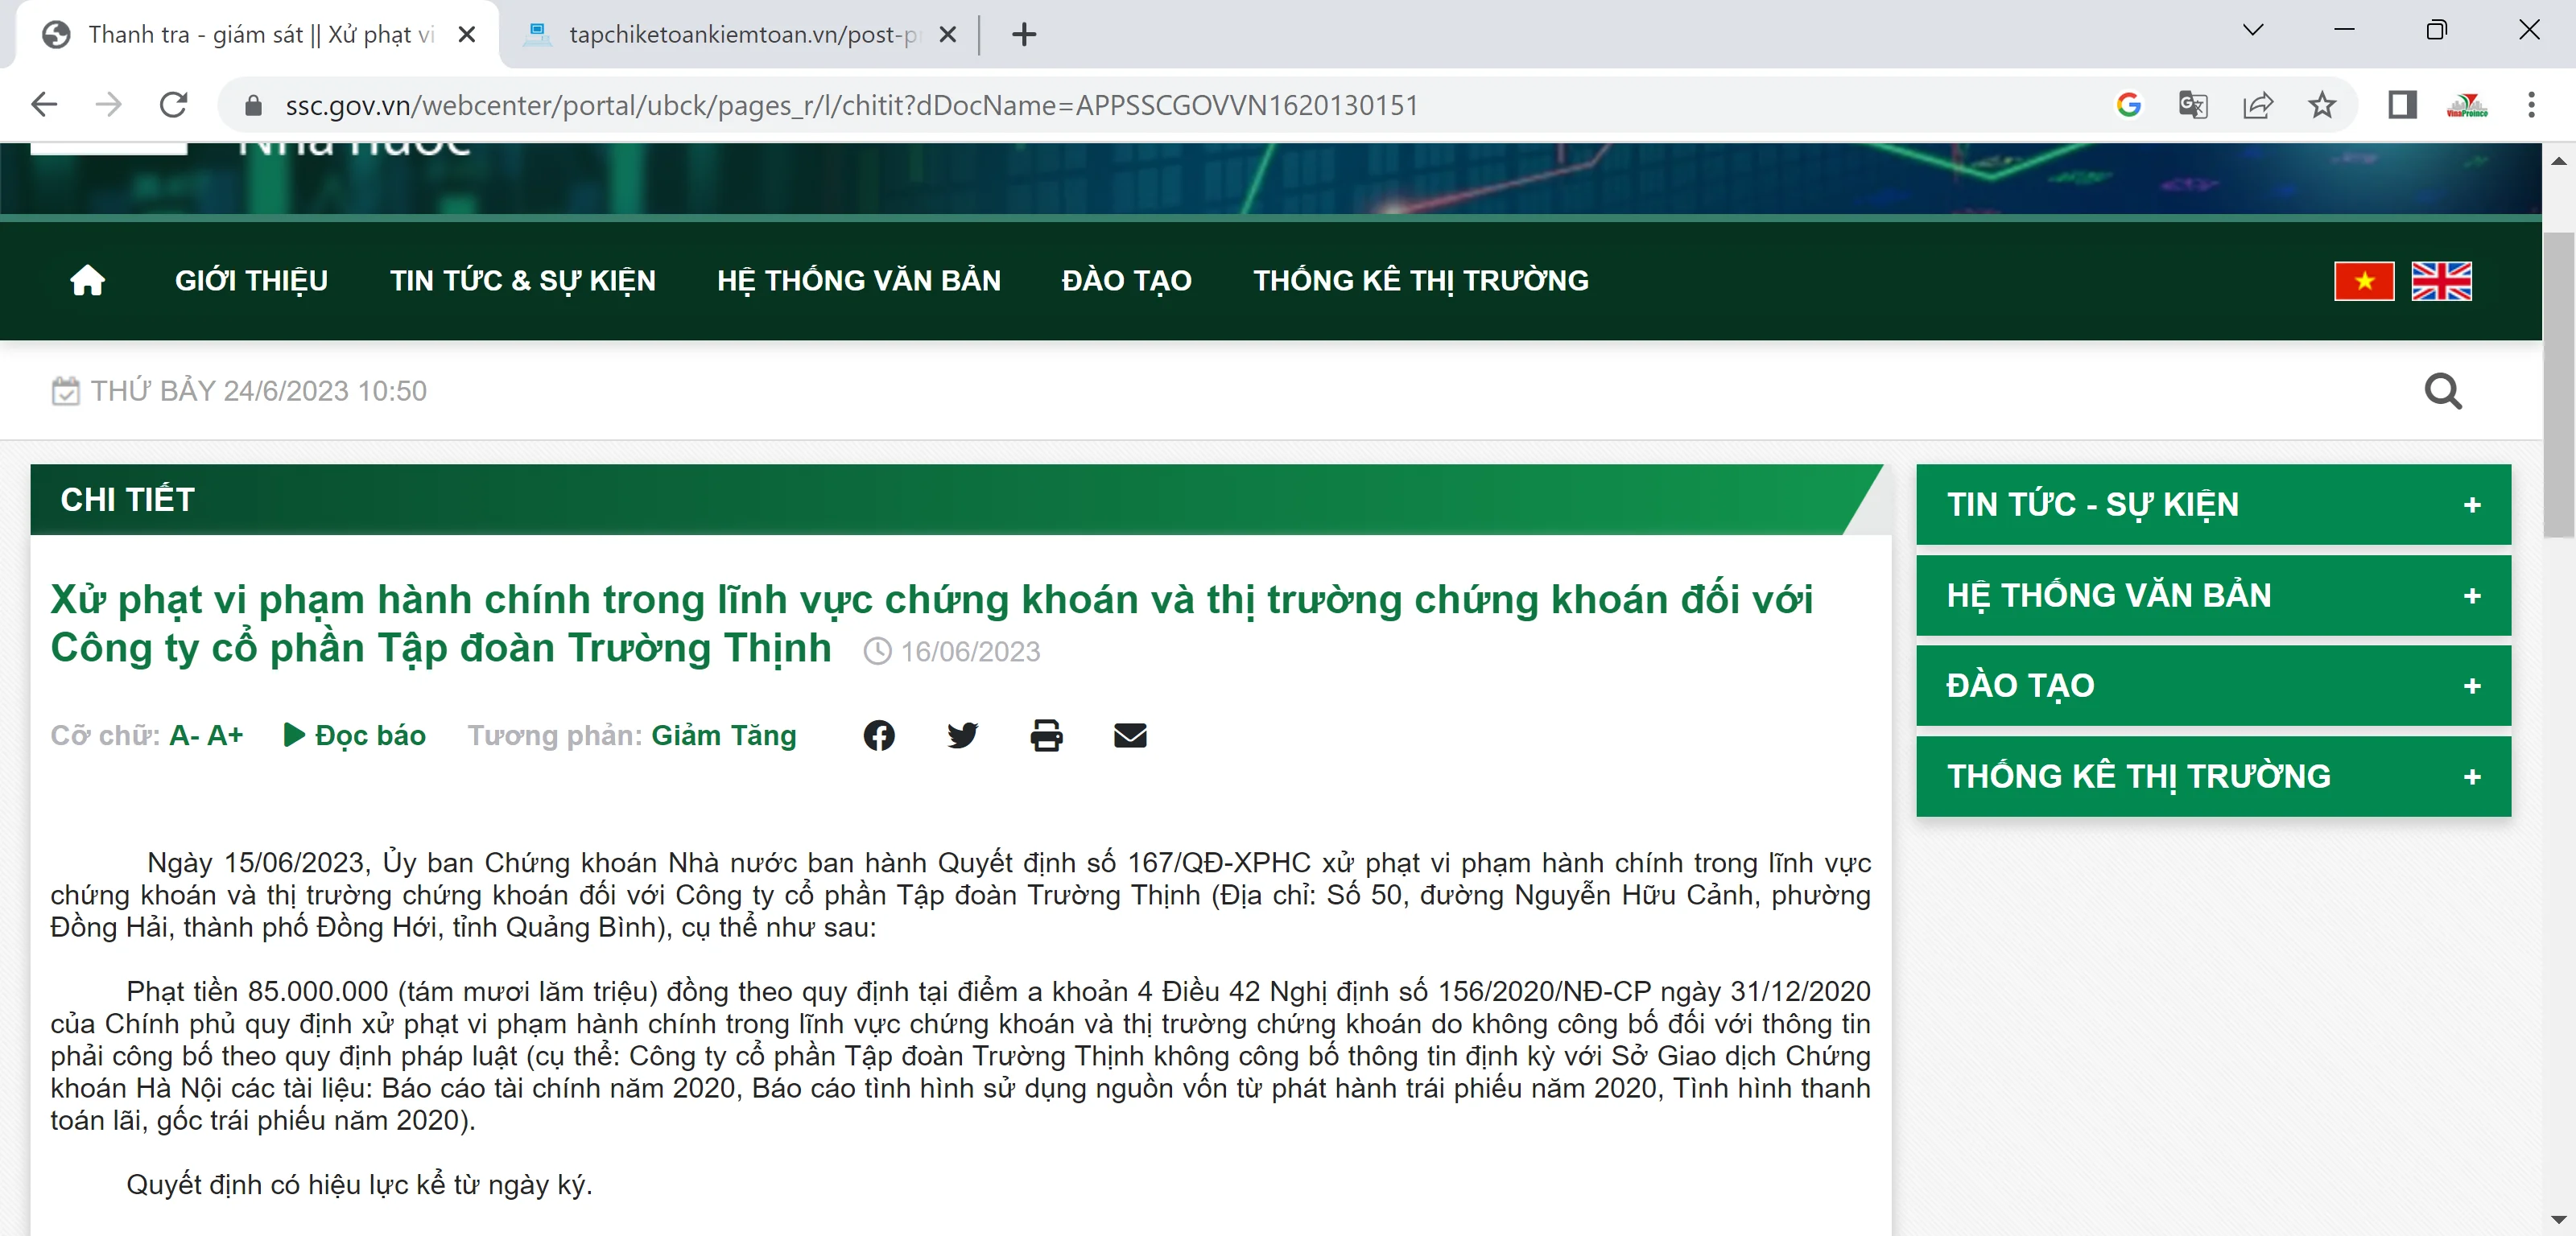 truong thinh 2